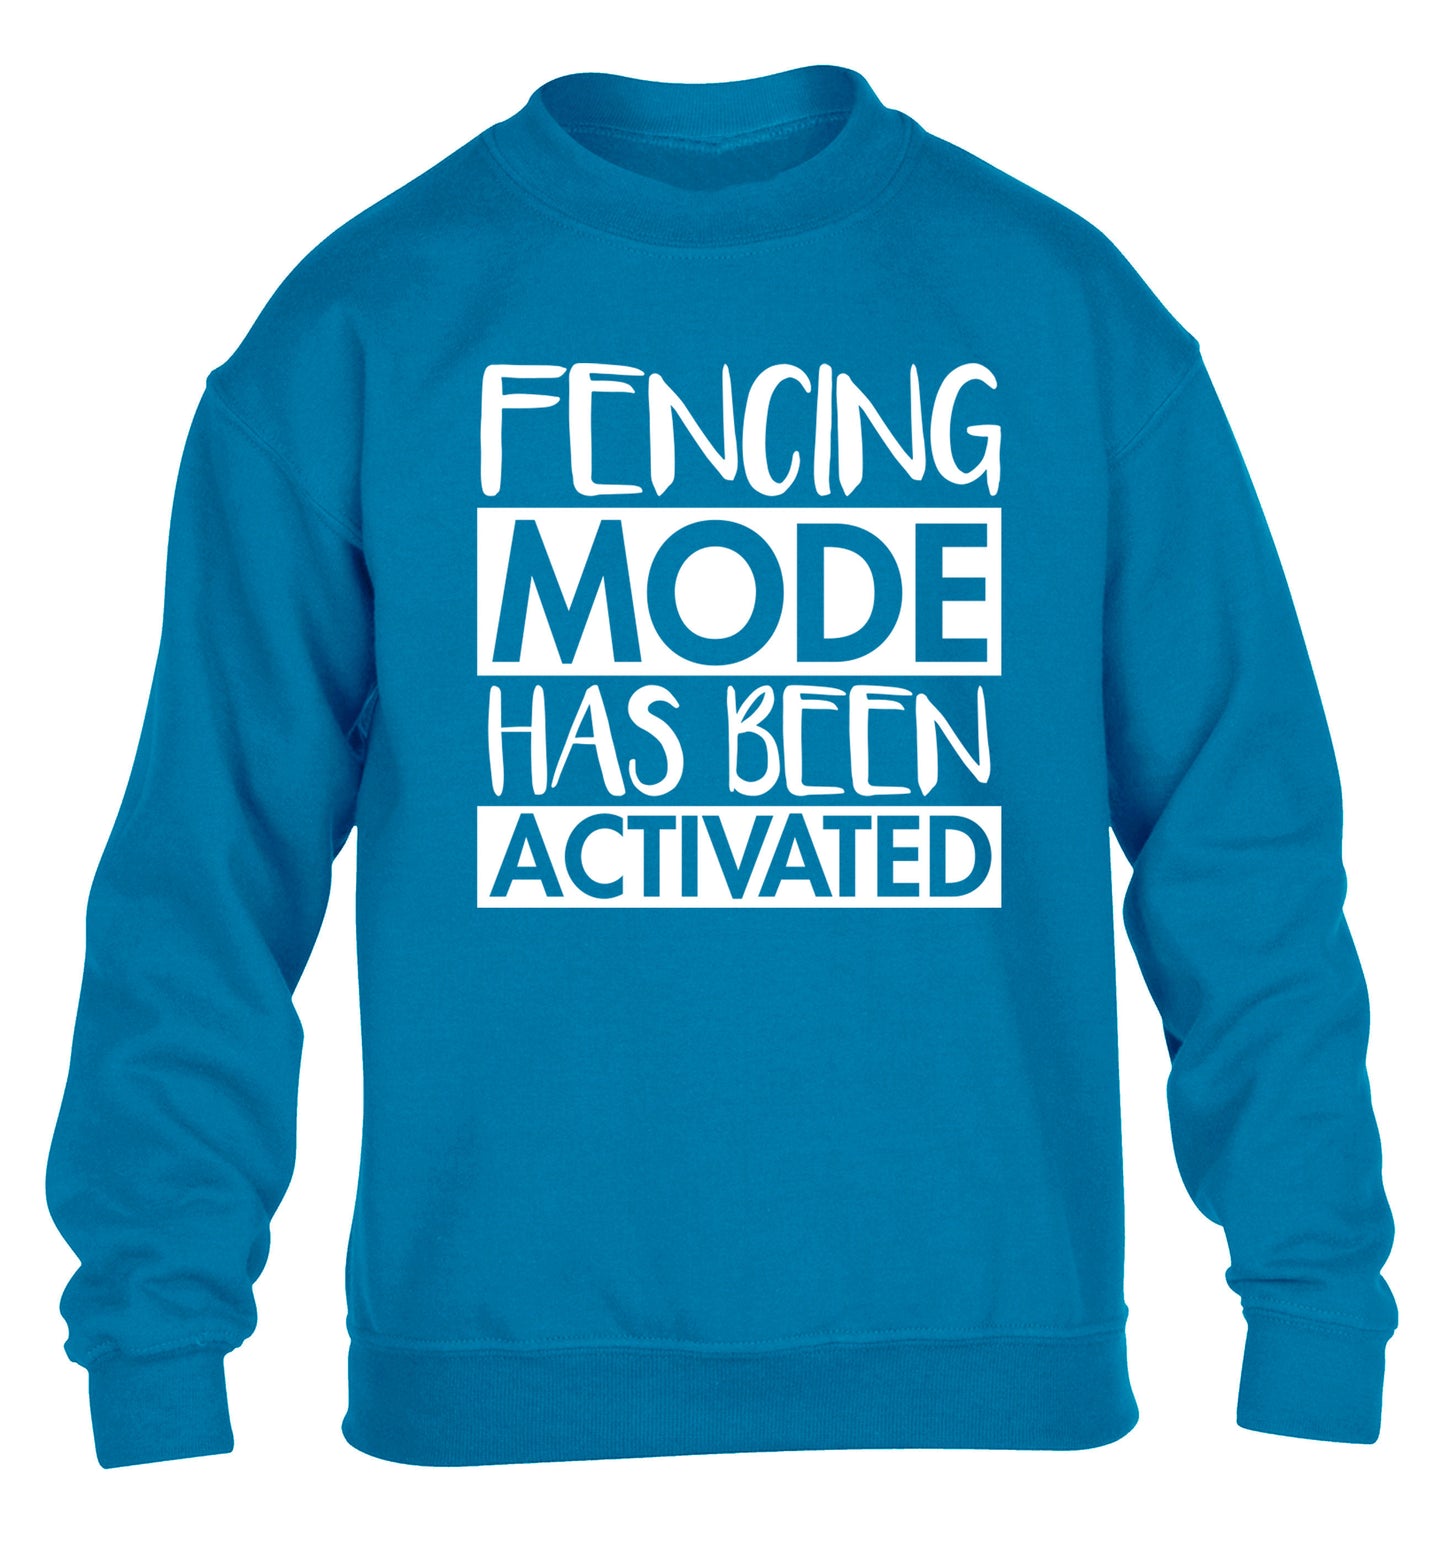 Fencing mode activated children's blue sweater 12-14 Years